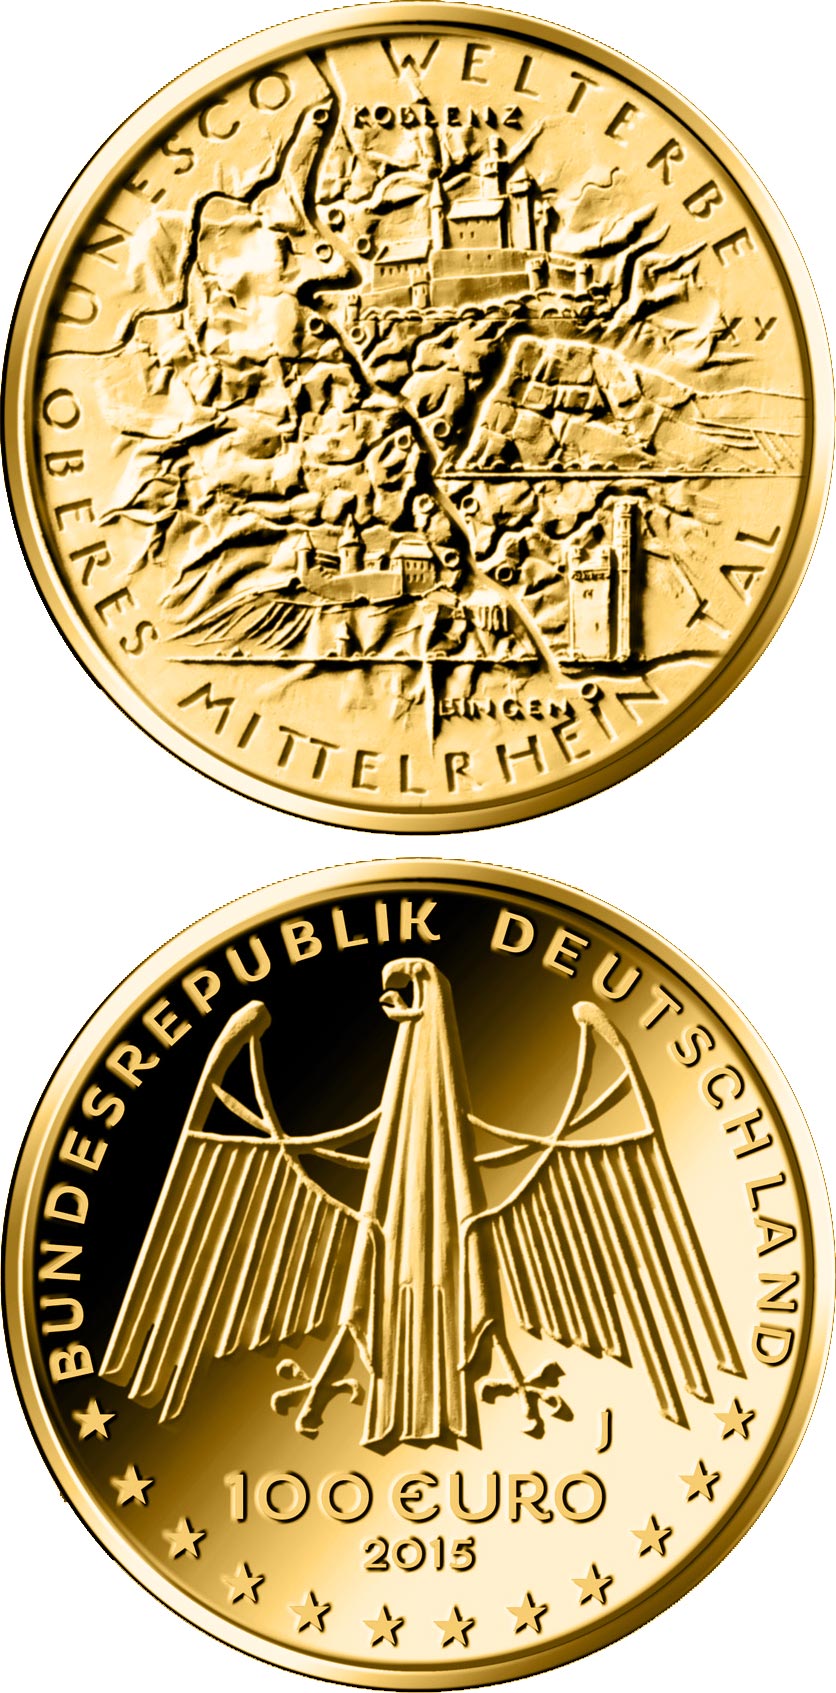 Image of 100 euro coin - UNESCO Welterbe - Oberes Mittelrheintal | Germany 2015.  The Gold coin is of Proof quality.